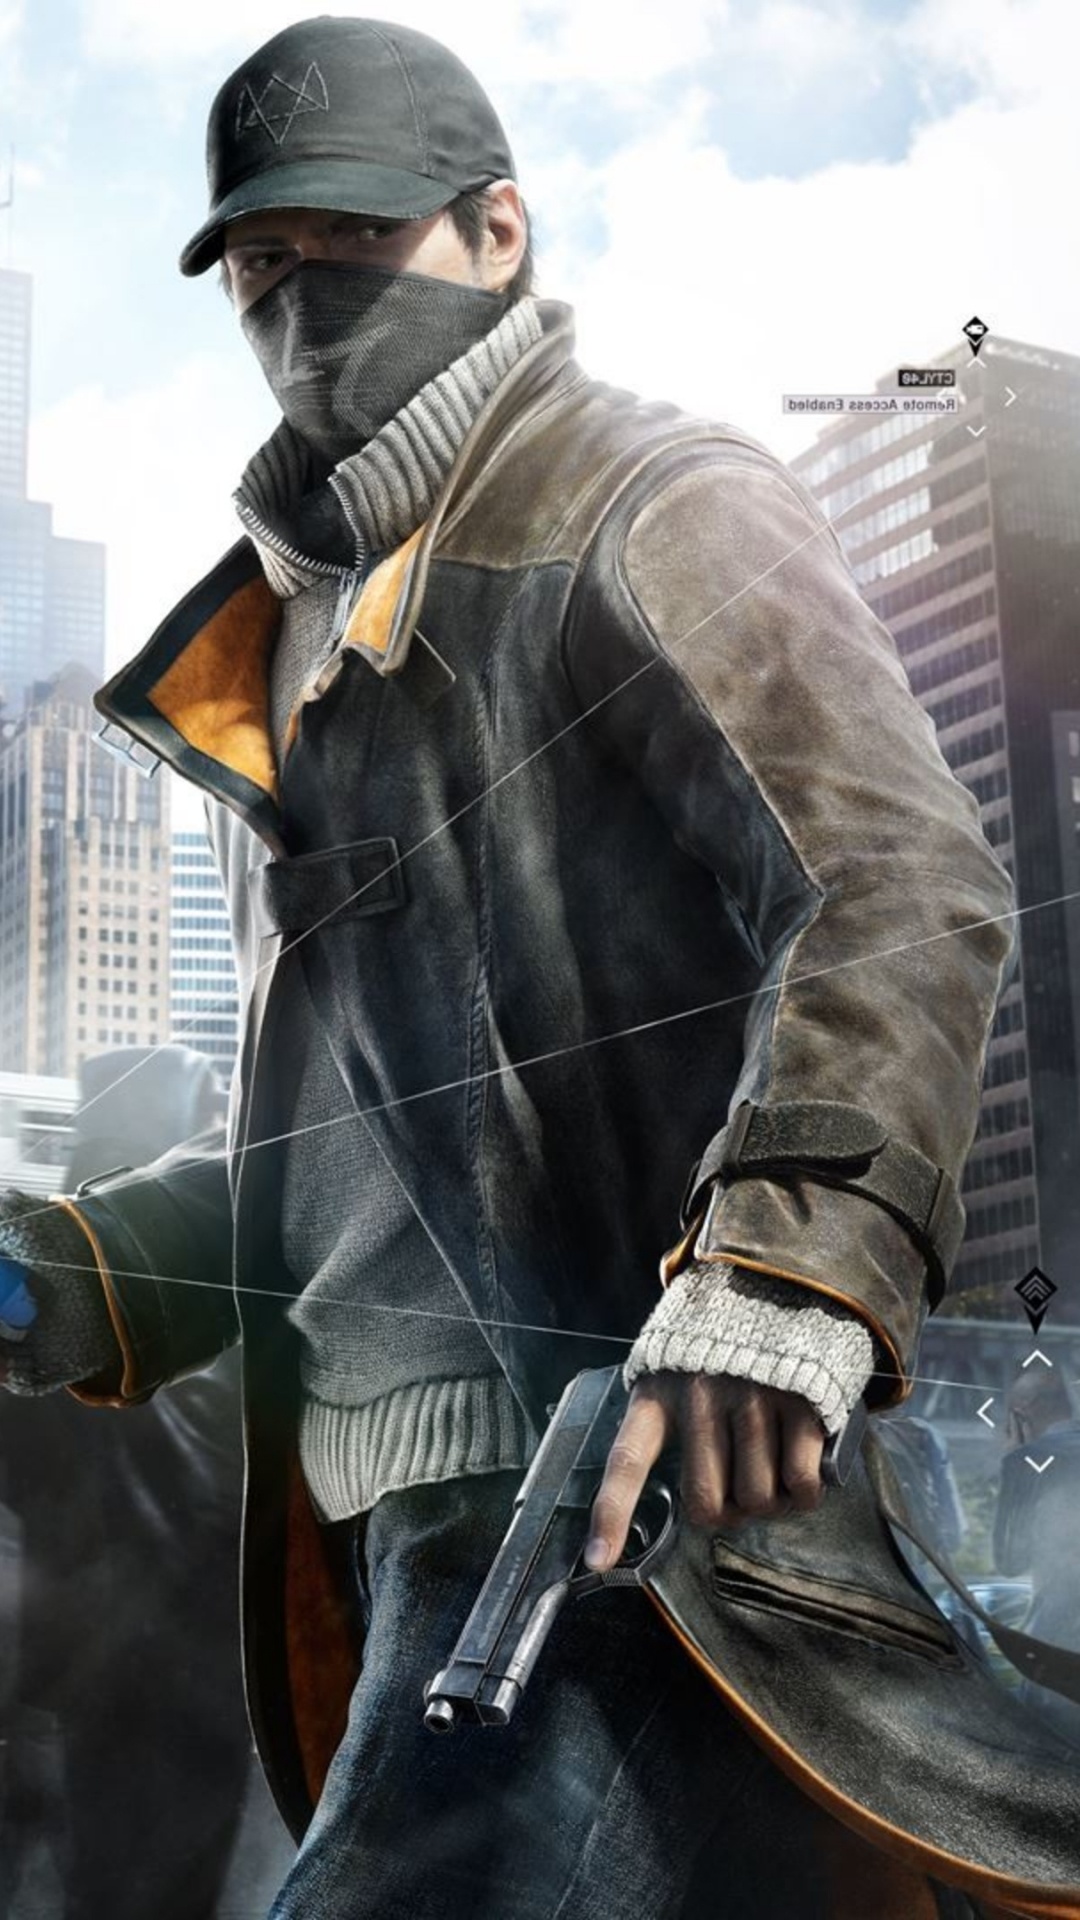 1080x1920 Watch Dogs 2 Wallpapers for IPhone 6S /7 /8 [Retina HD]